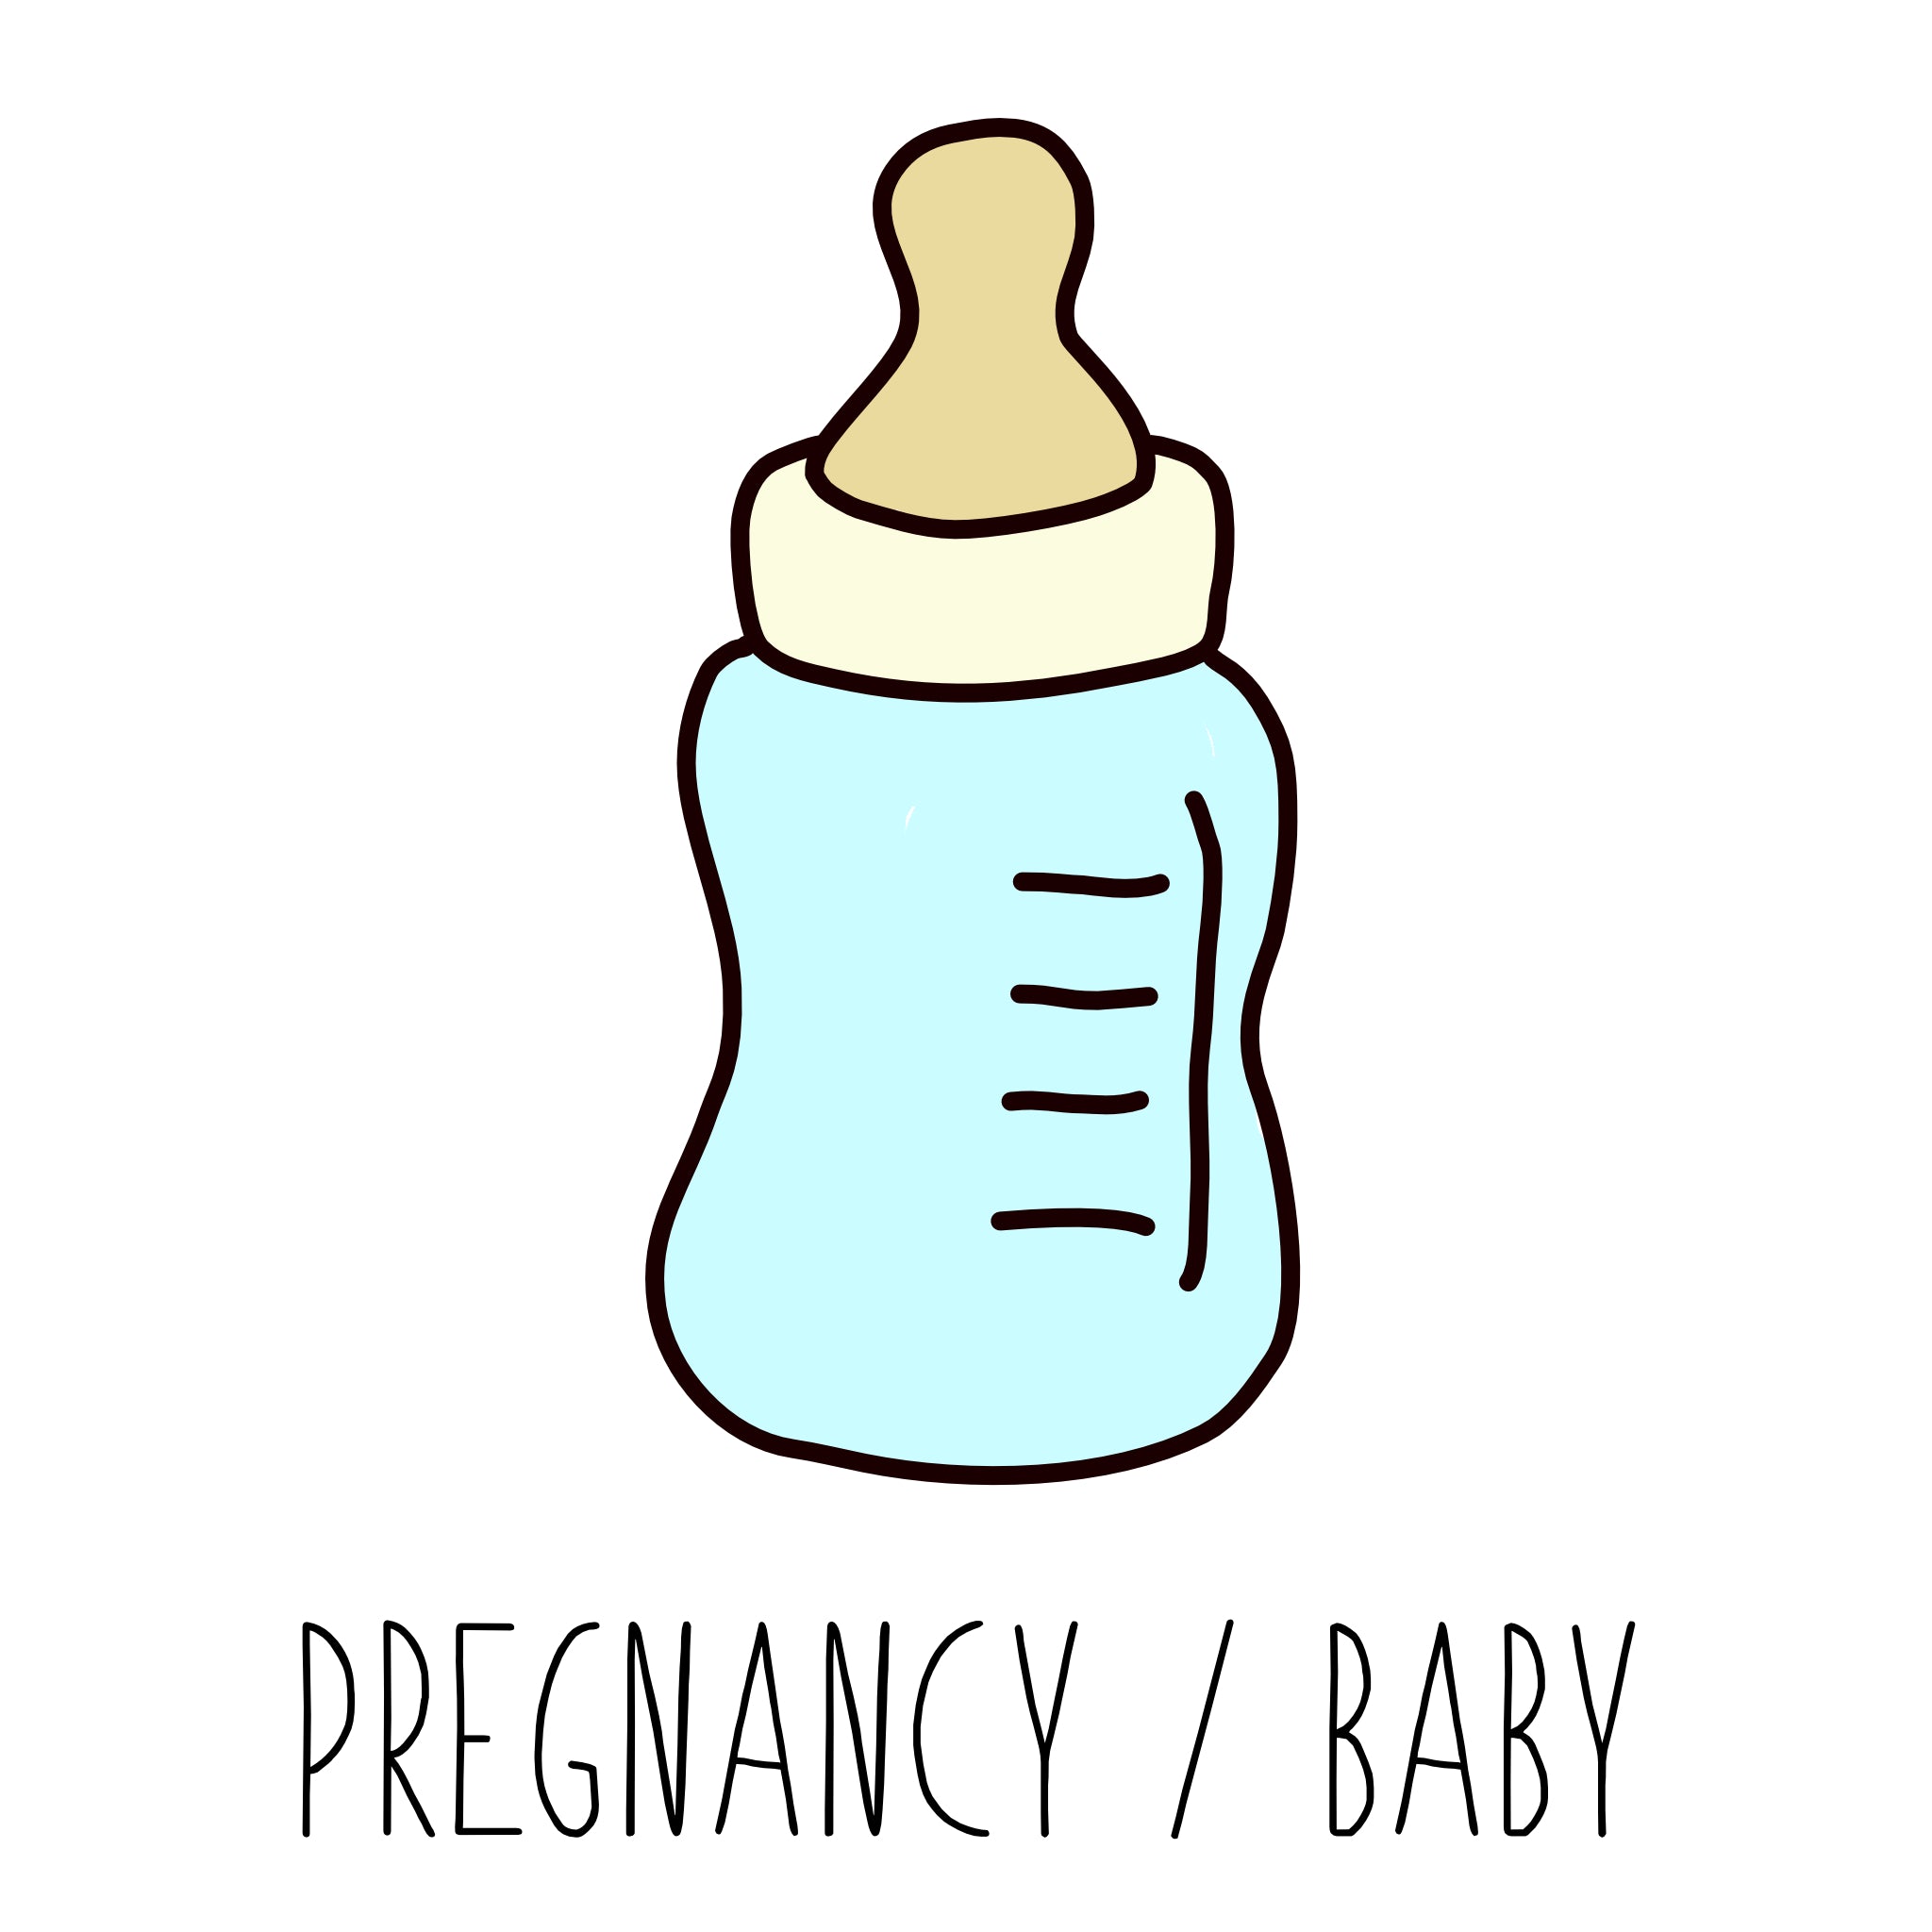 Pregnancy/Baby Cards